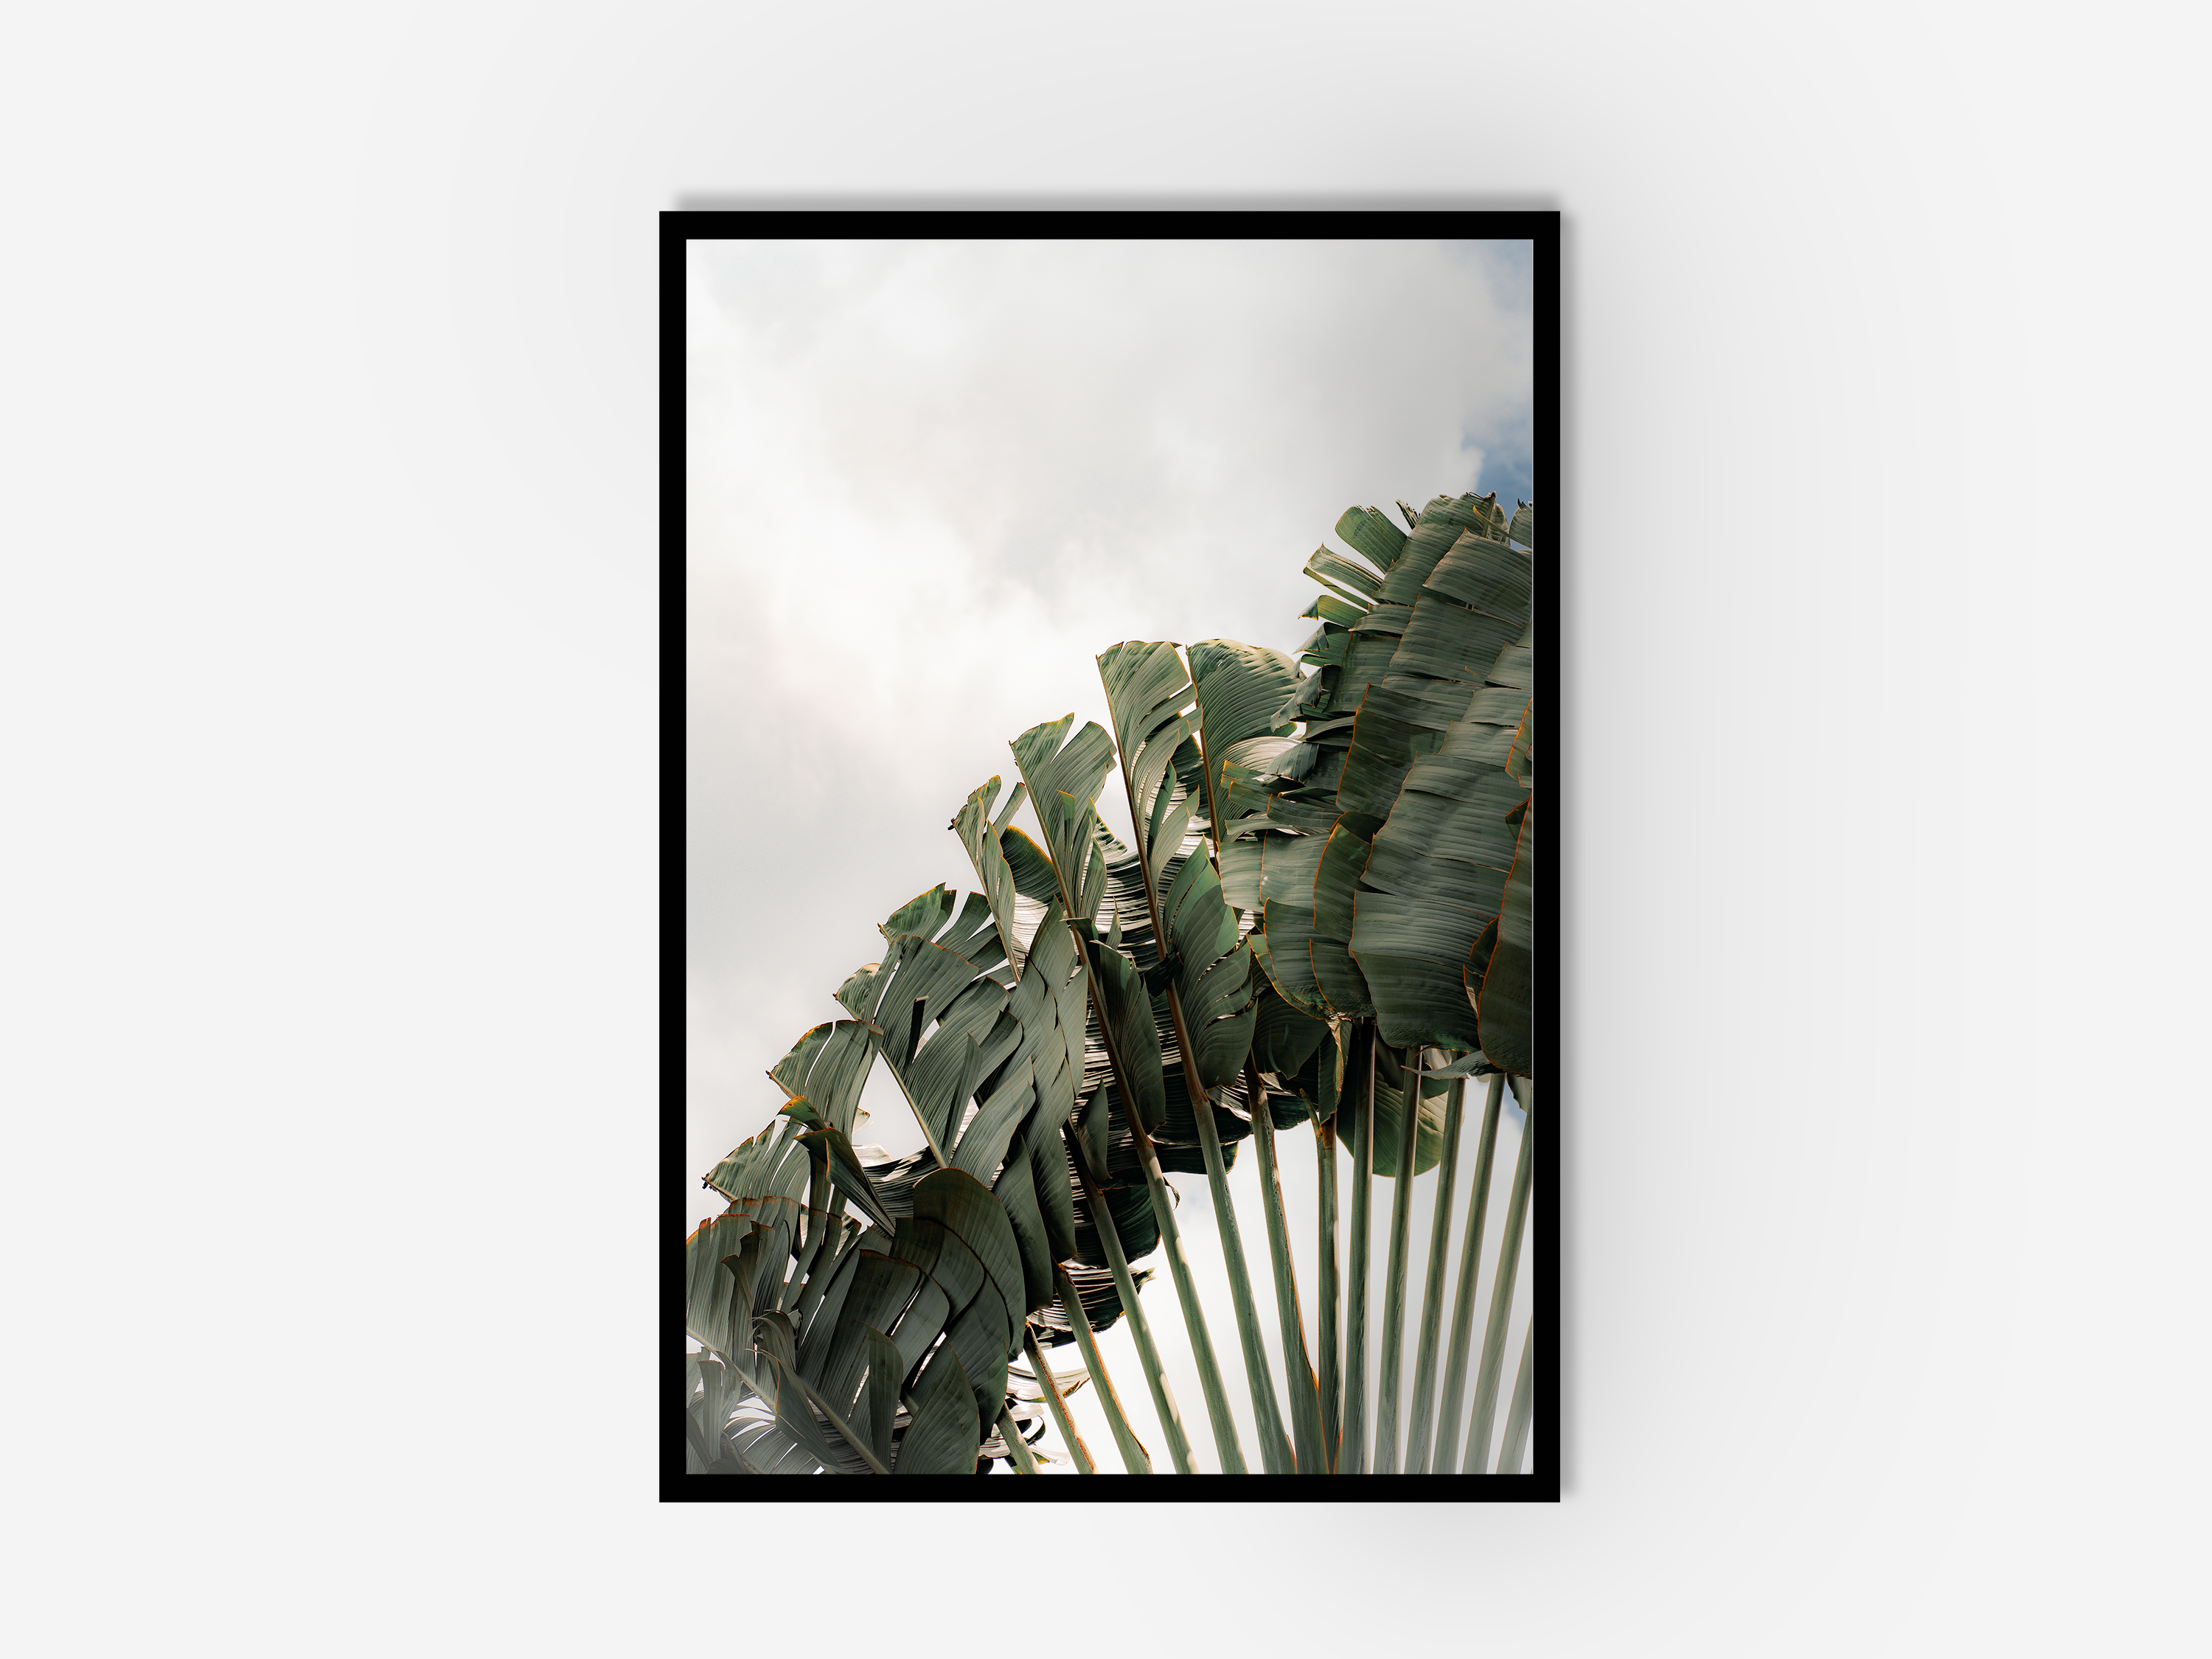 A framed photograph of palm tree leaves